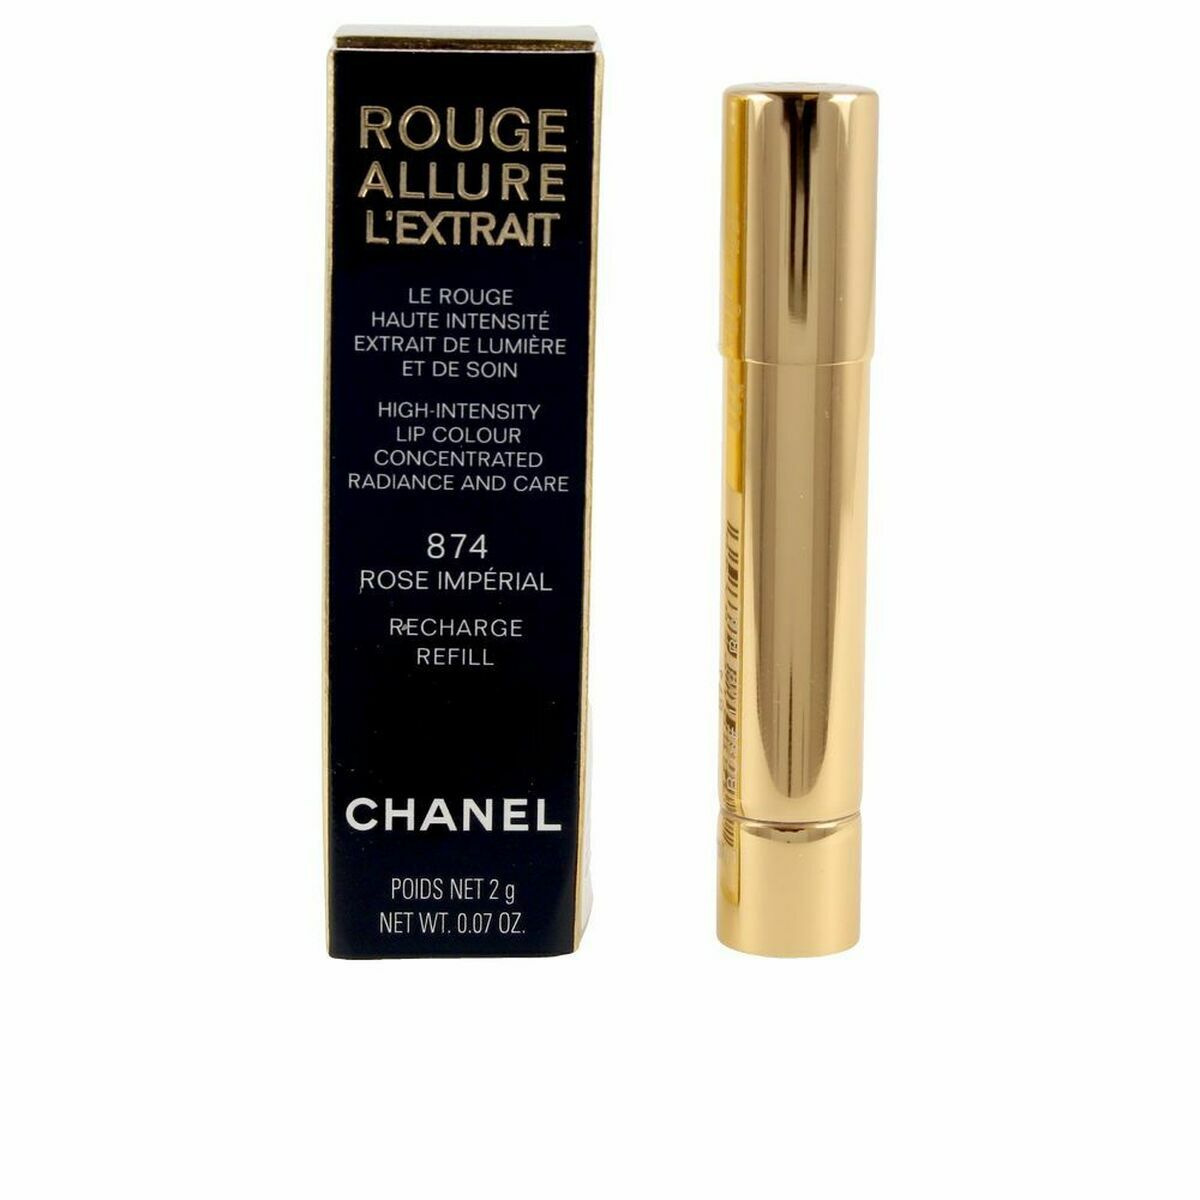 Kaufe Lippenstift Chanel Rouge Allure L'extrait - Ricarica Rose Imperial 874 bei AWK Flagship um € 51.00